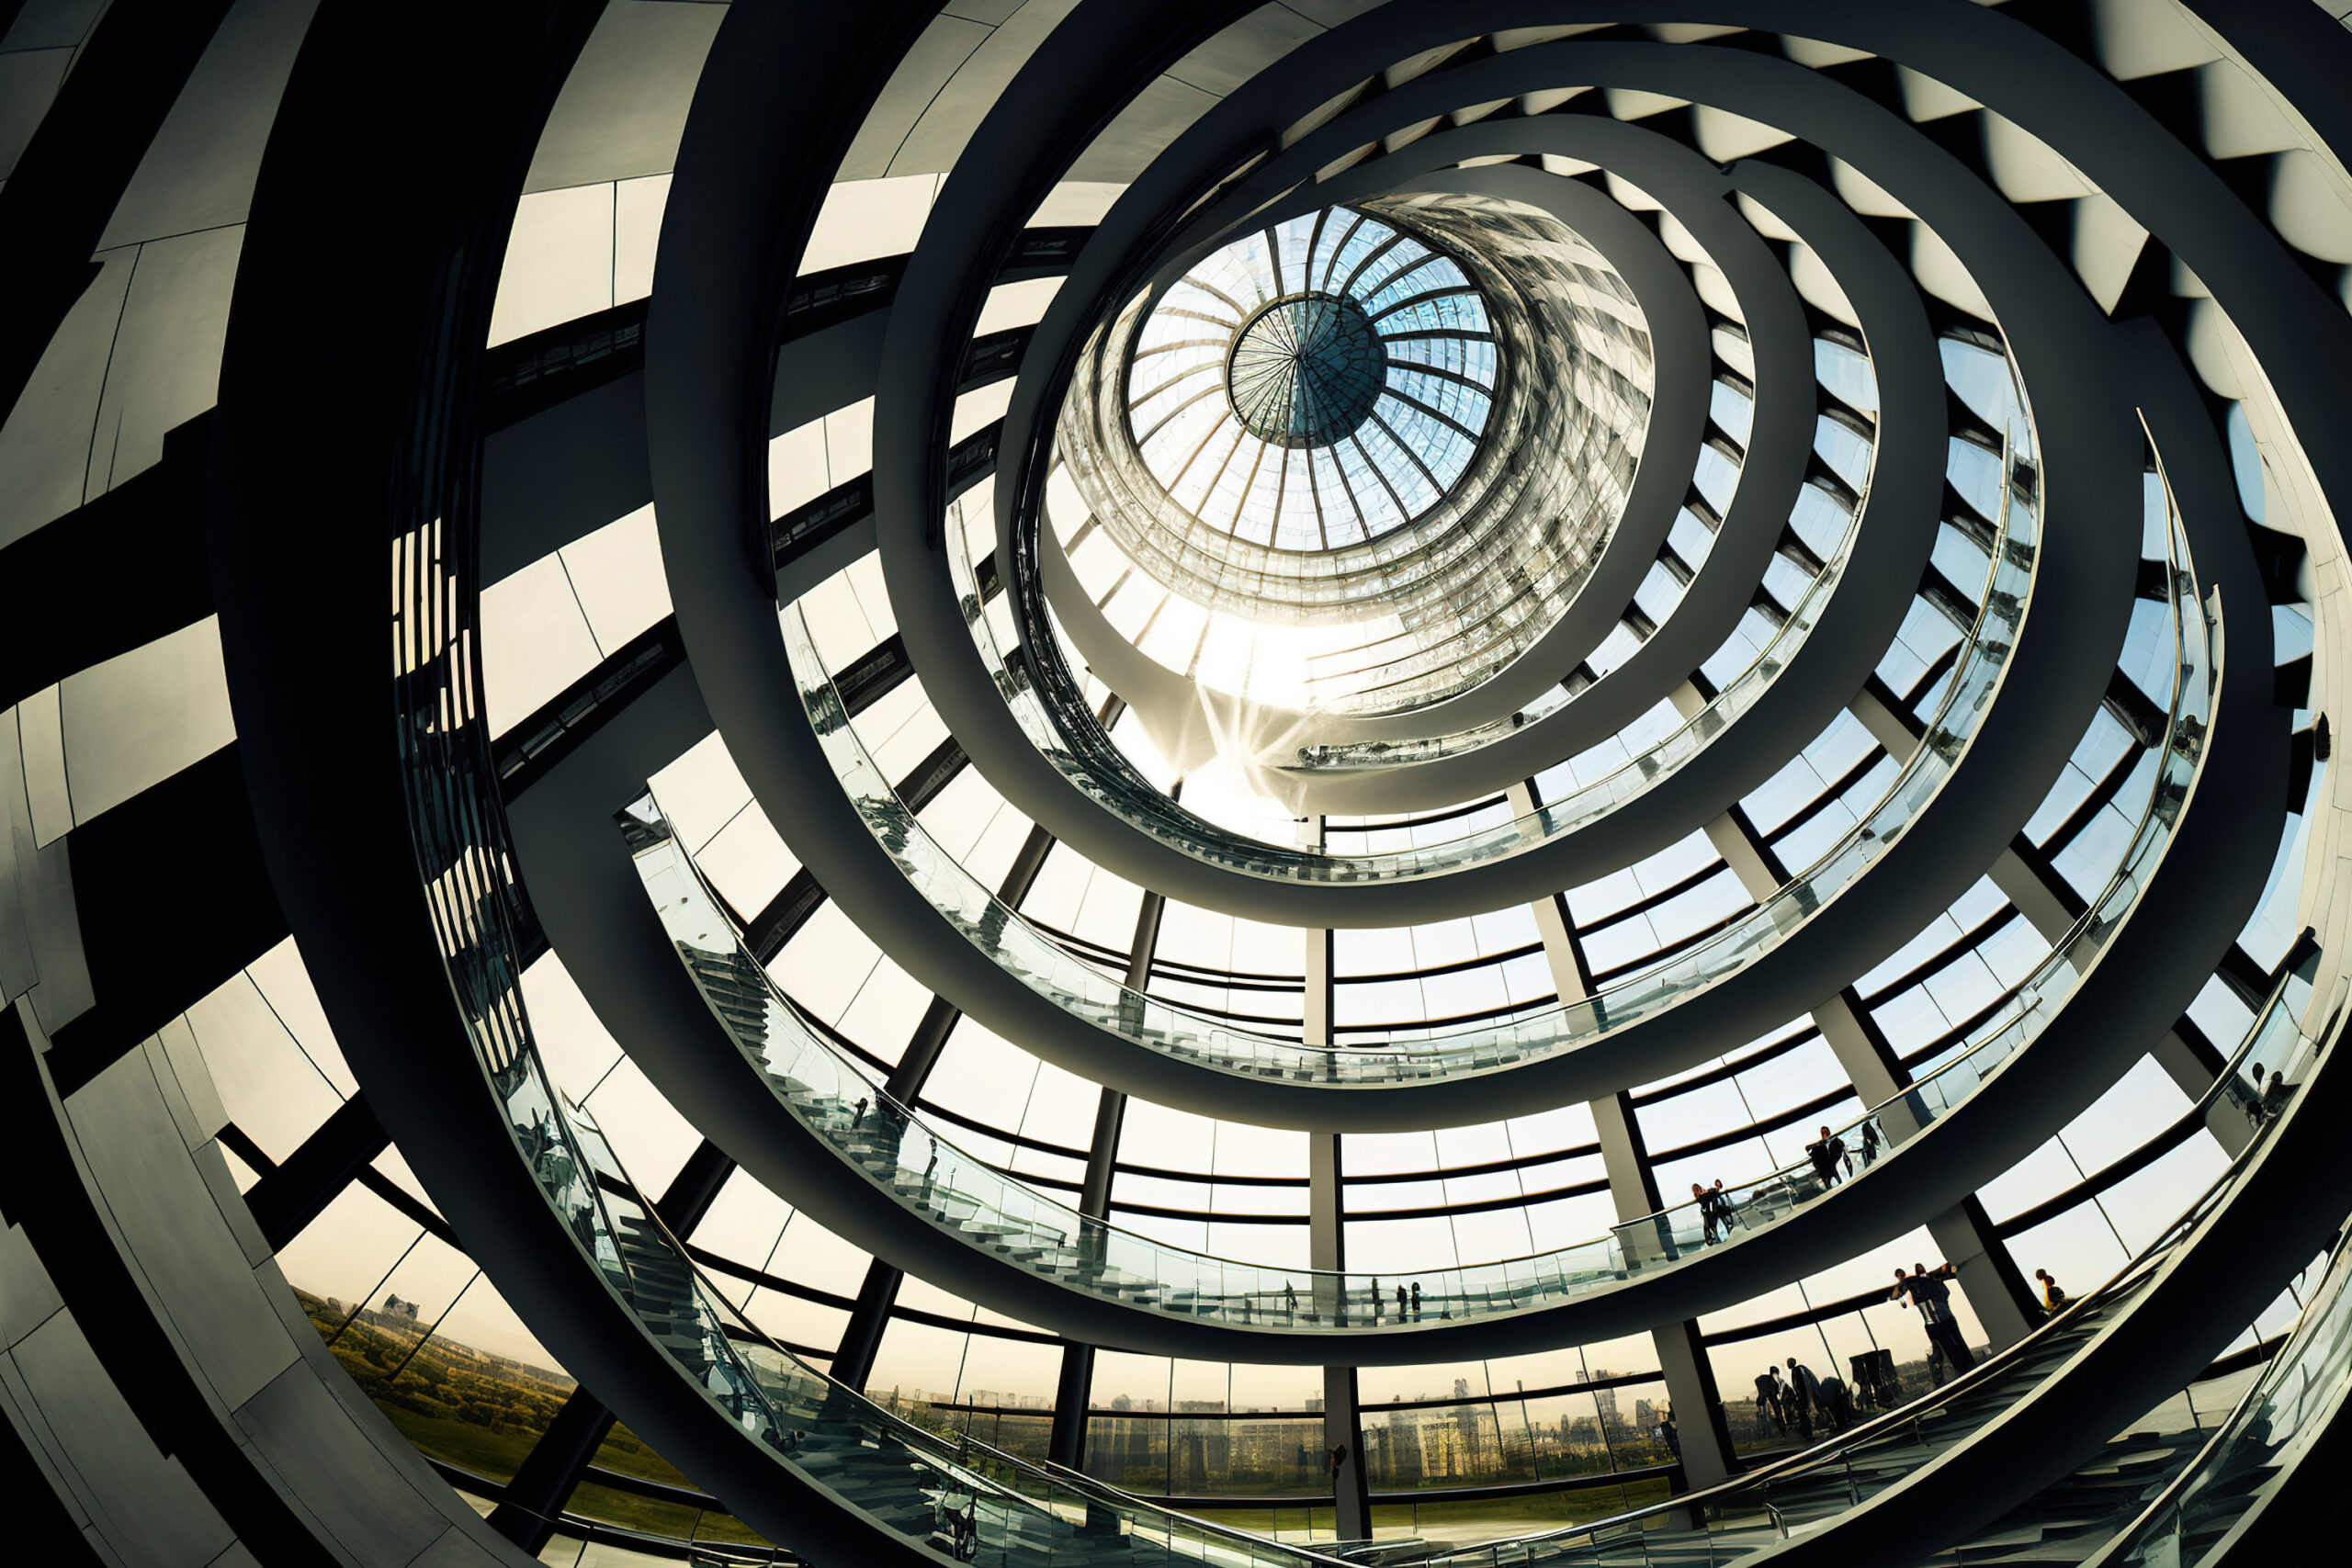 production-services-and-filming-in-berlin-modern-dome-inside-glass-metal-spiral-stairway